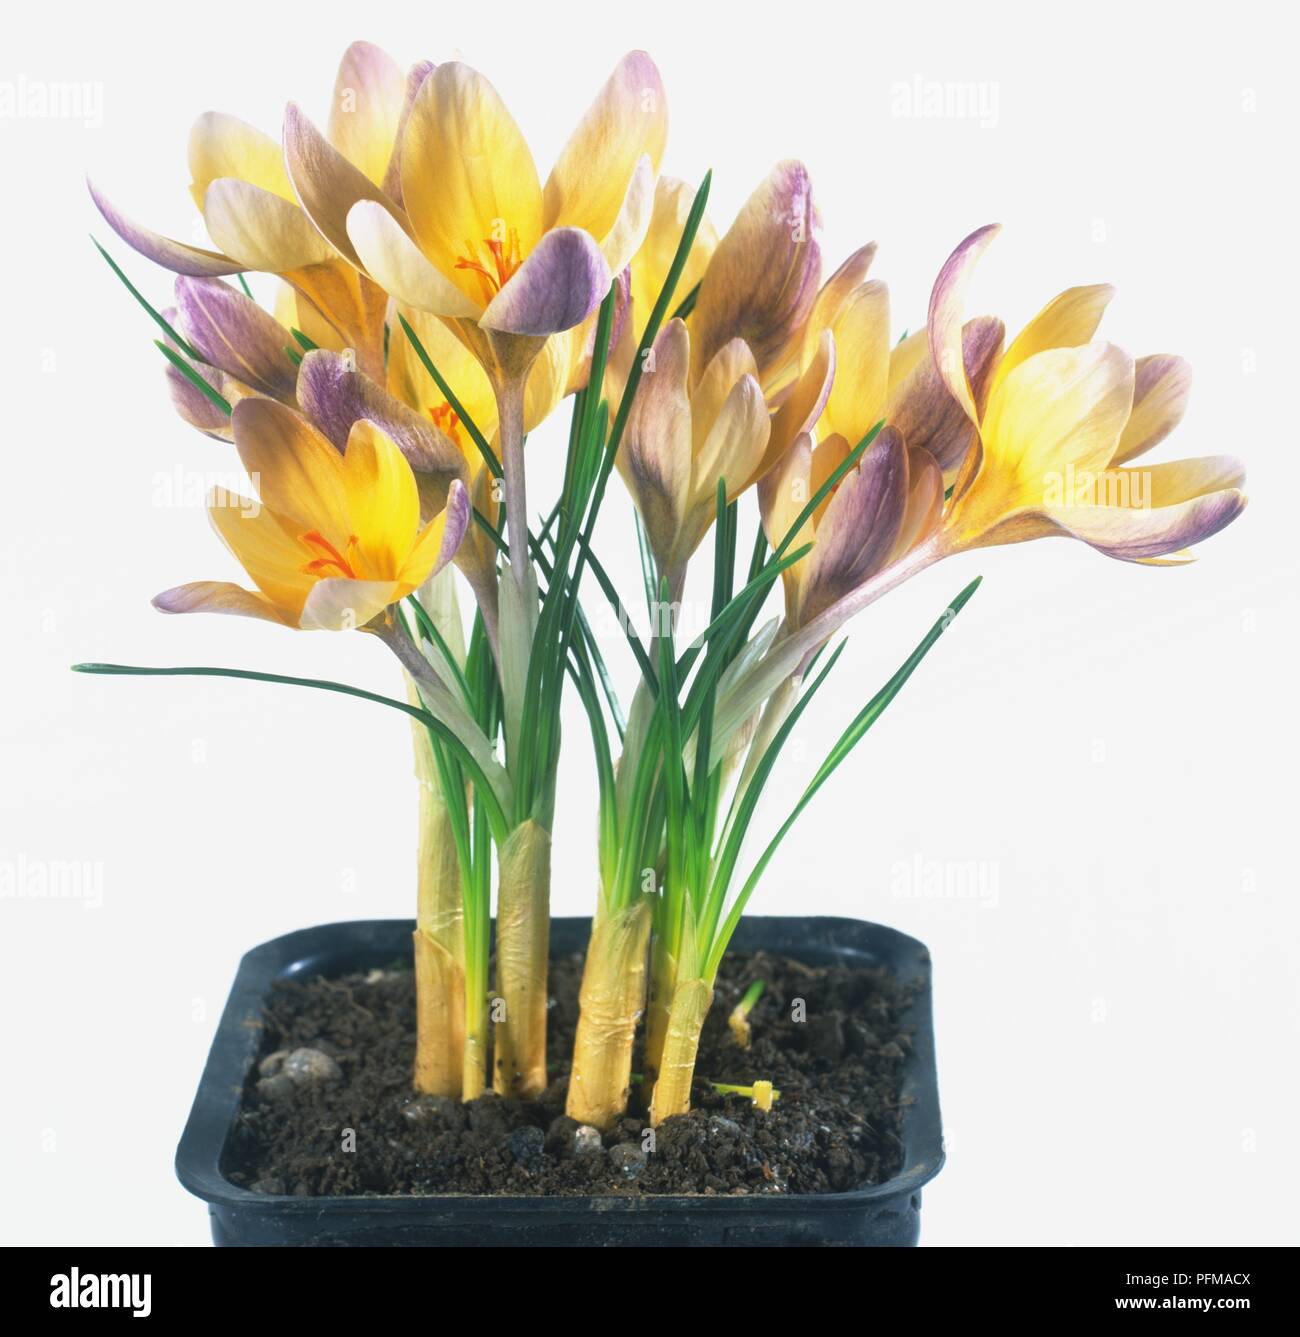 Yellow and purple coloured flower clusters of Crocus 'Advance' in a flower pot Stock Photo